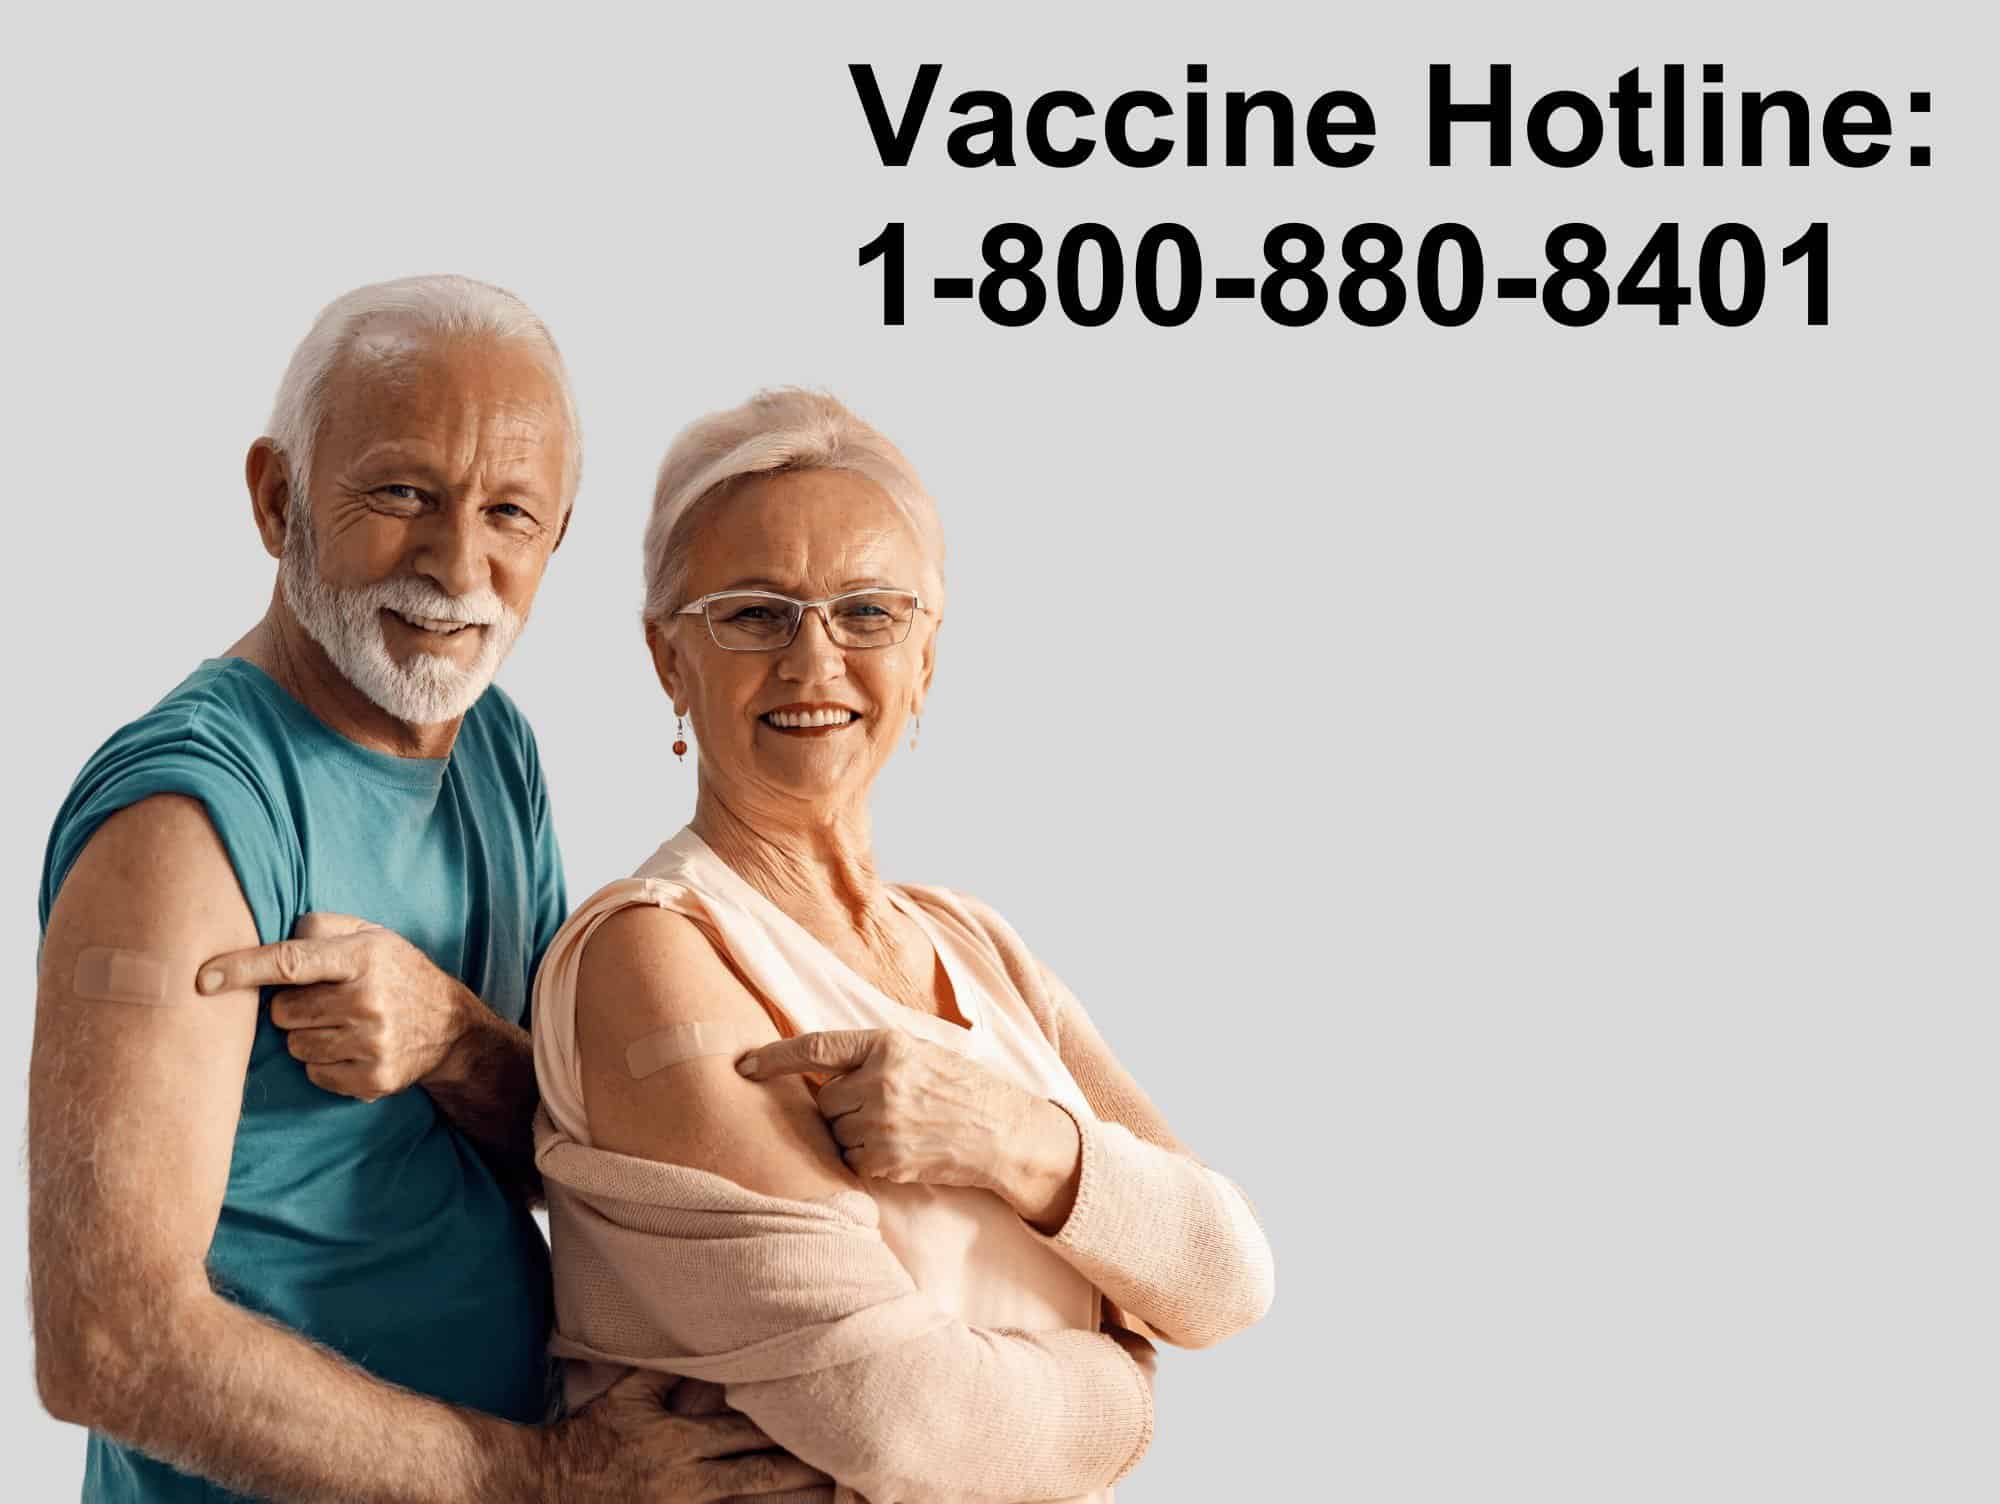 Elderly couple showing shots in arms, text says "Vaccine Hotline: 1-800-880-8401